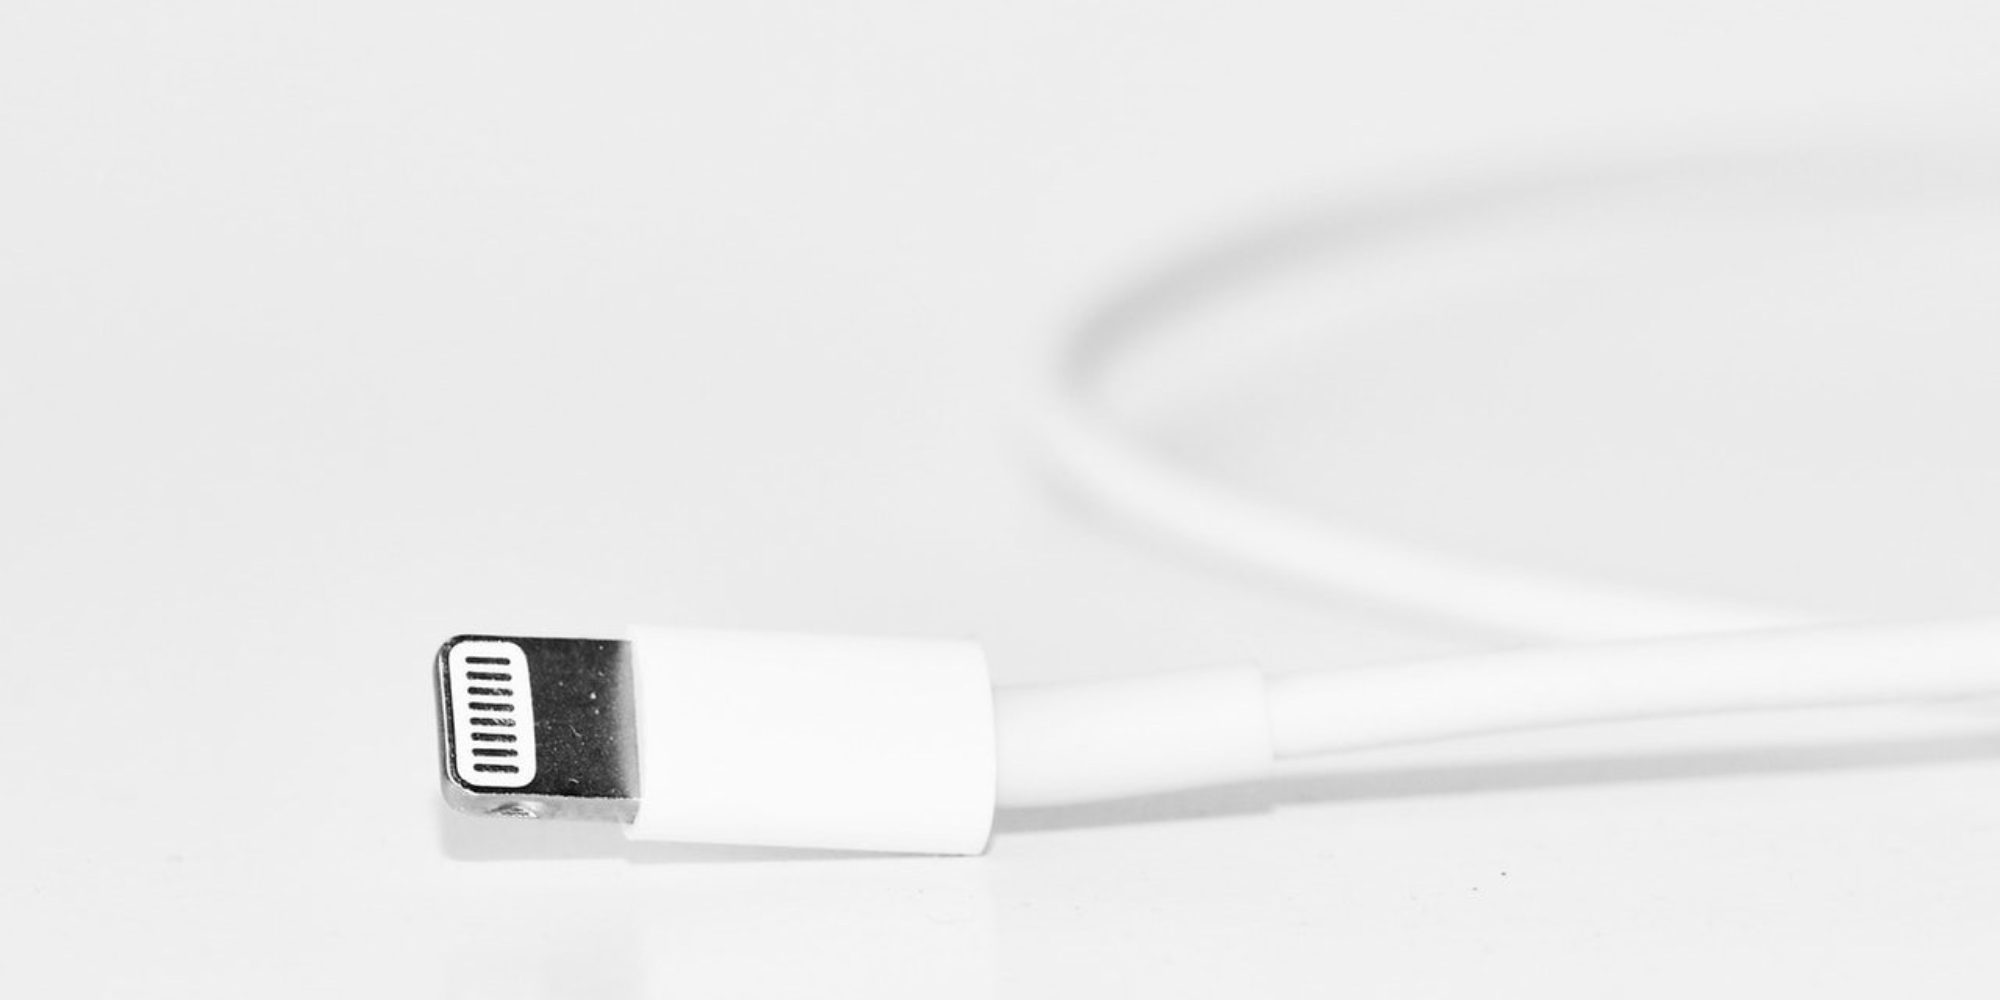 Buy Quality Cables to Avoid Possible Device Damage or Even Fires